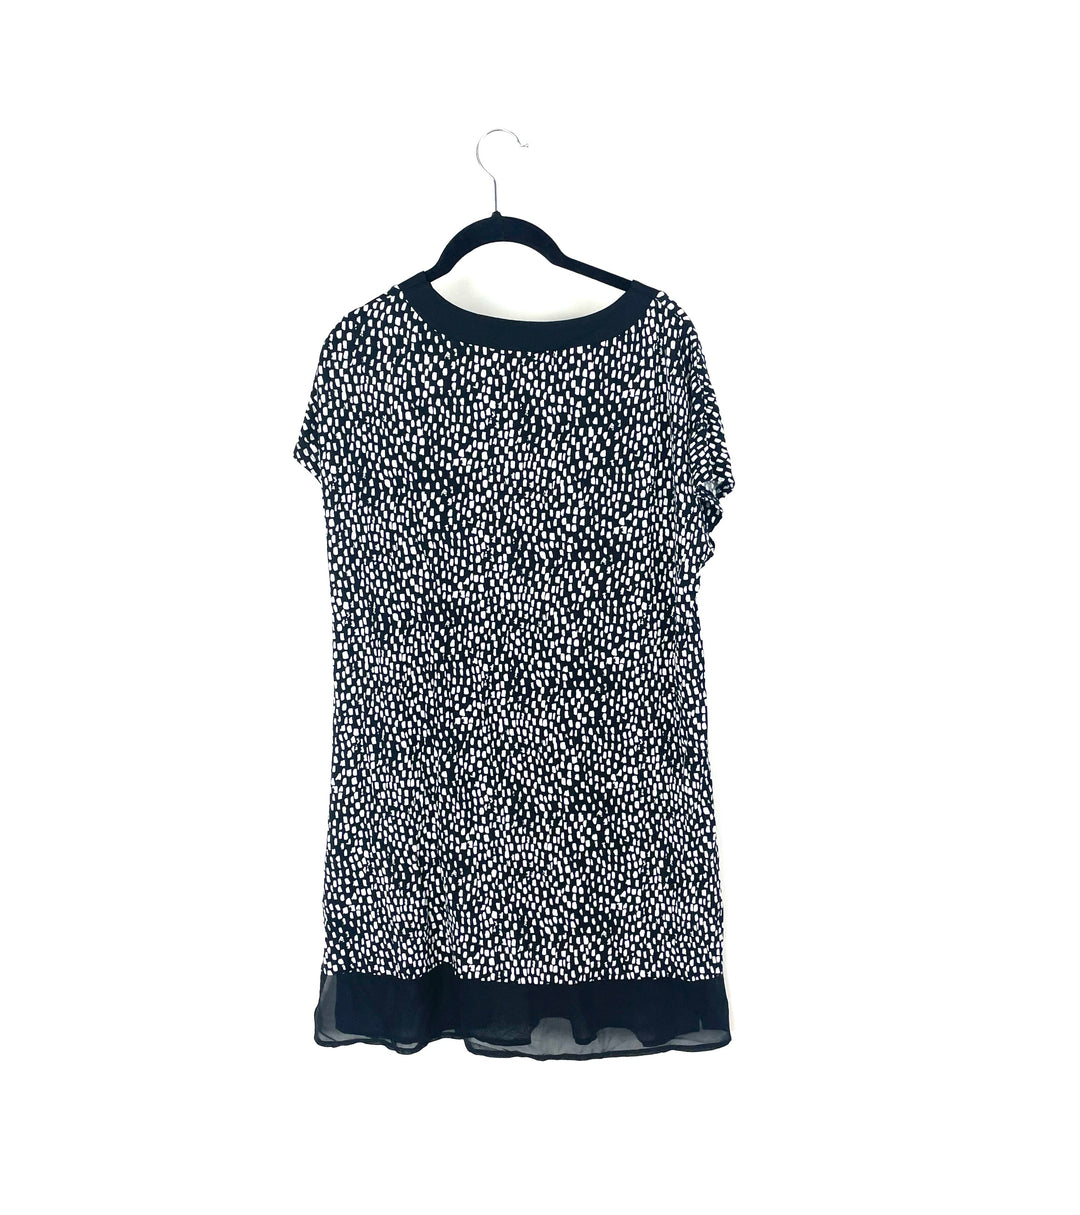 Black and White Printed Night Gown - Small